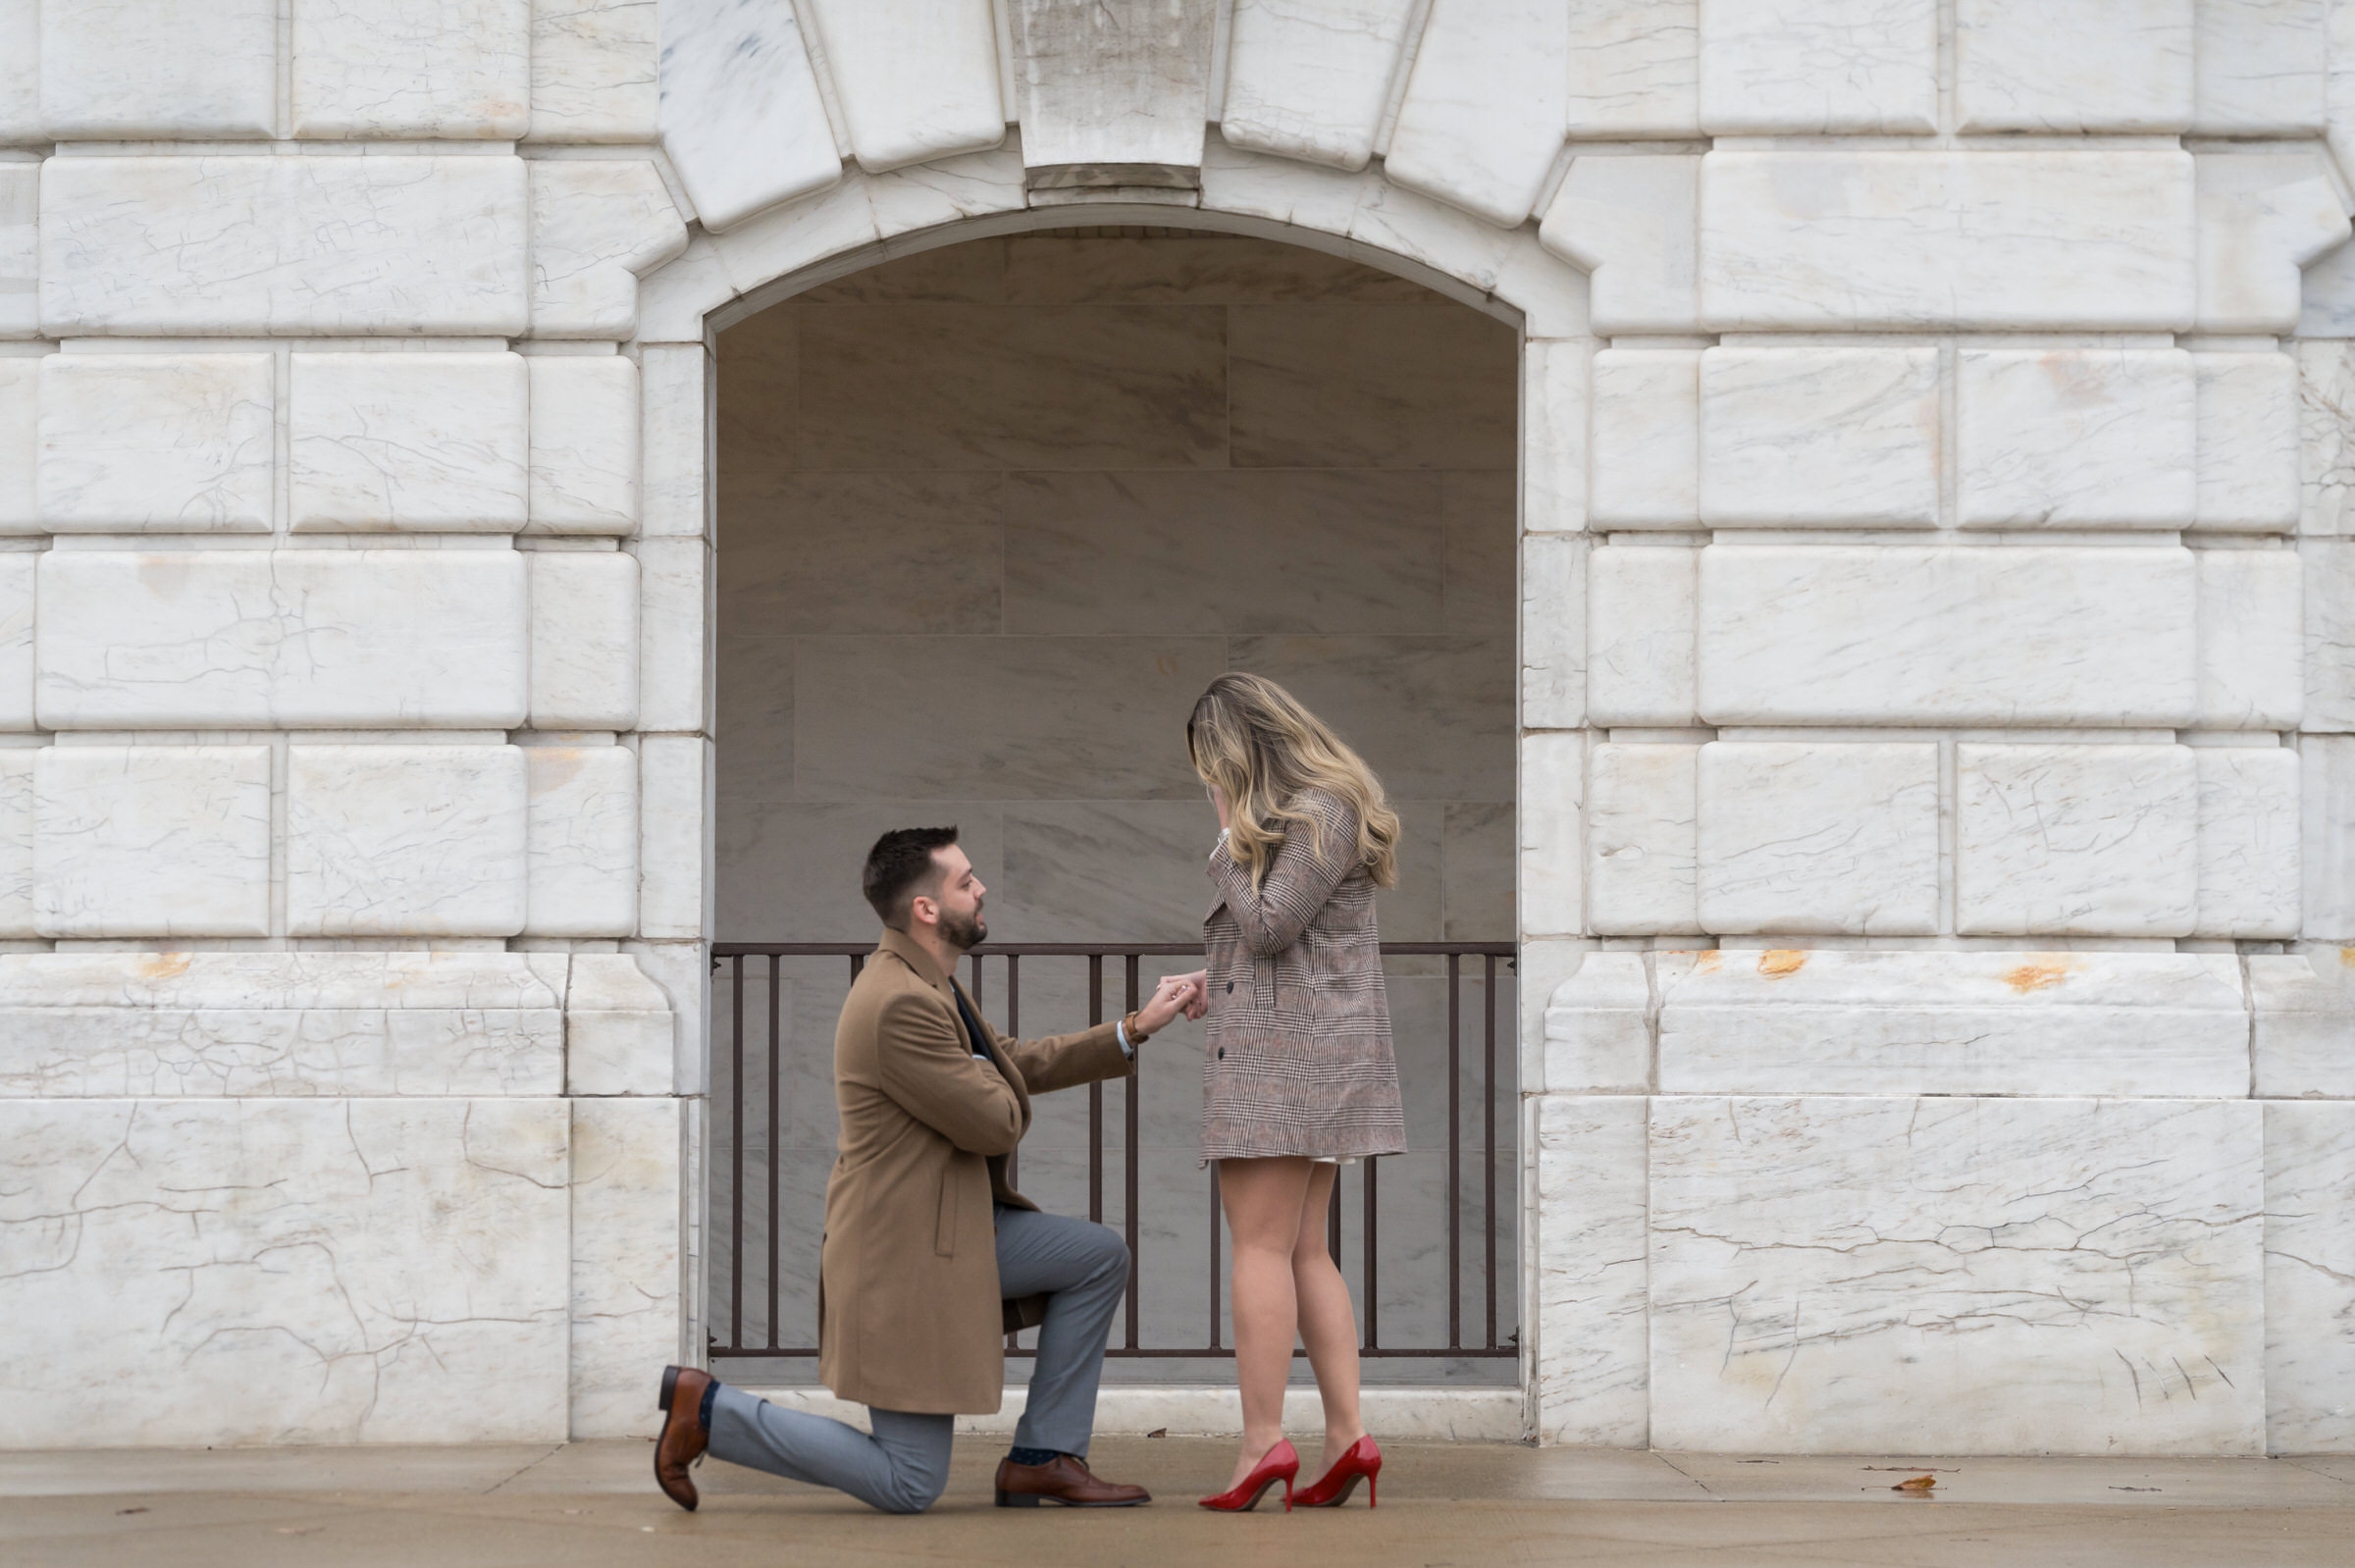 A man takes a knee, reaches into his coat pocket, and begins Detroit Institute of Arts proposal to his girlfriend.